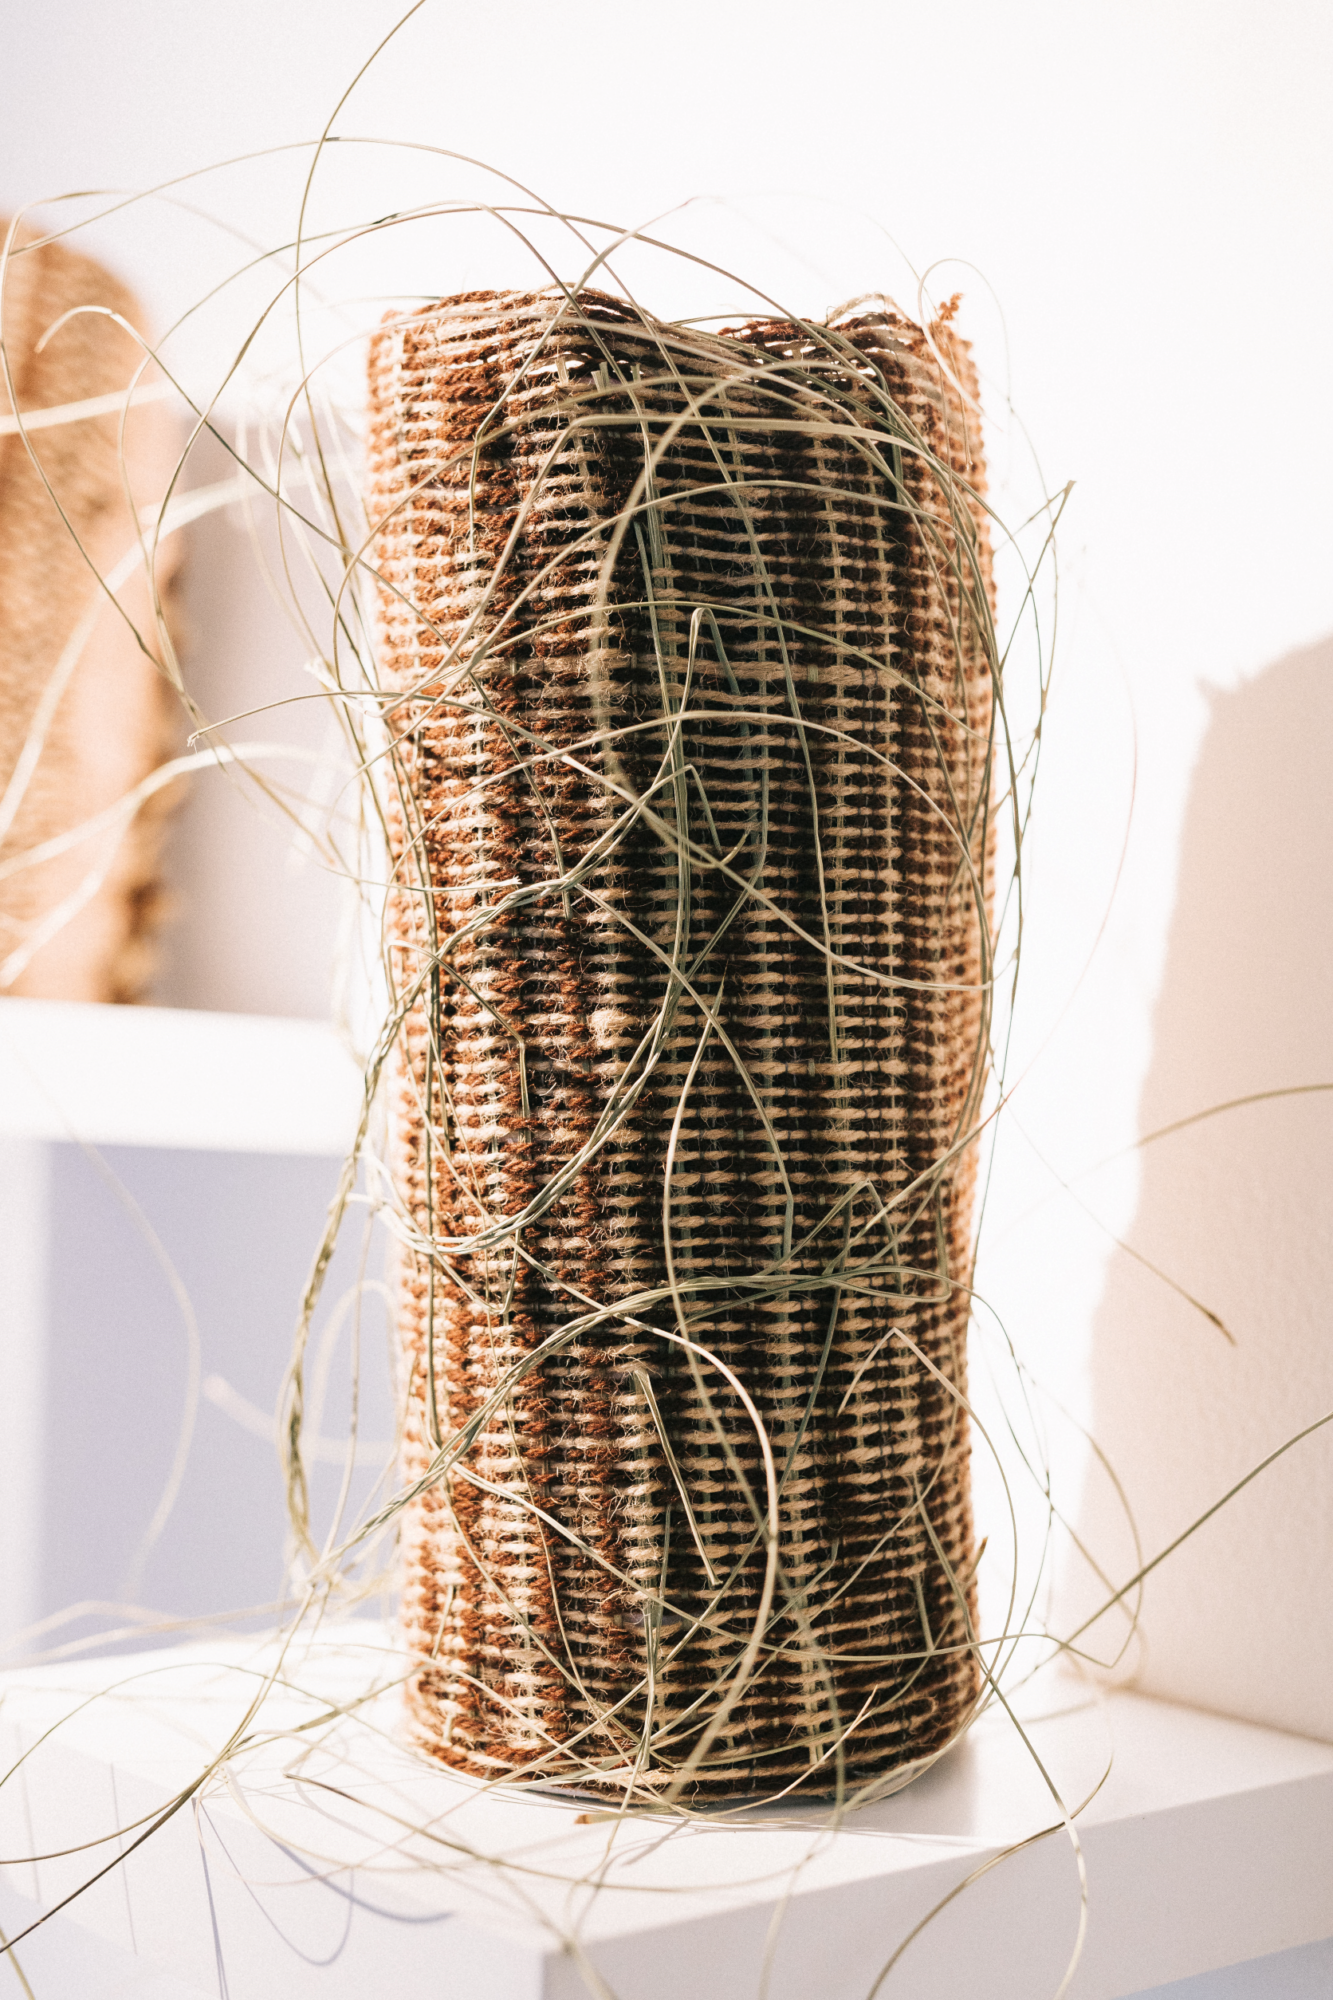 A tall vertically presented vessel made from jute, recycled wool, reeds, sheoak nettles, presented on a floating white shelf.